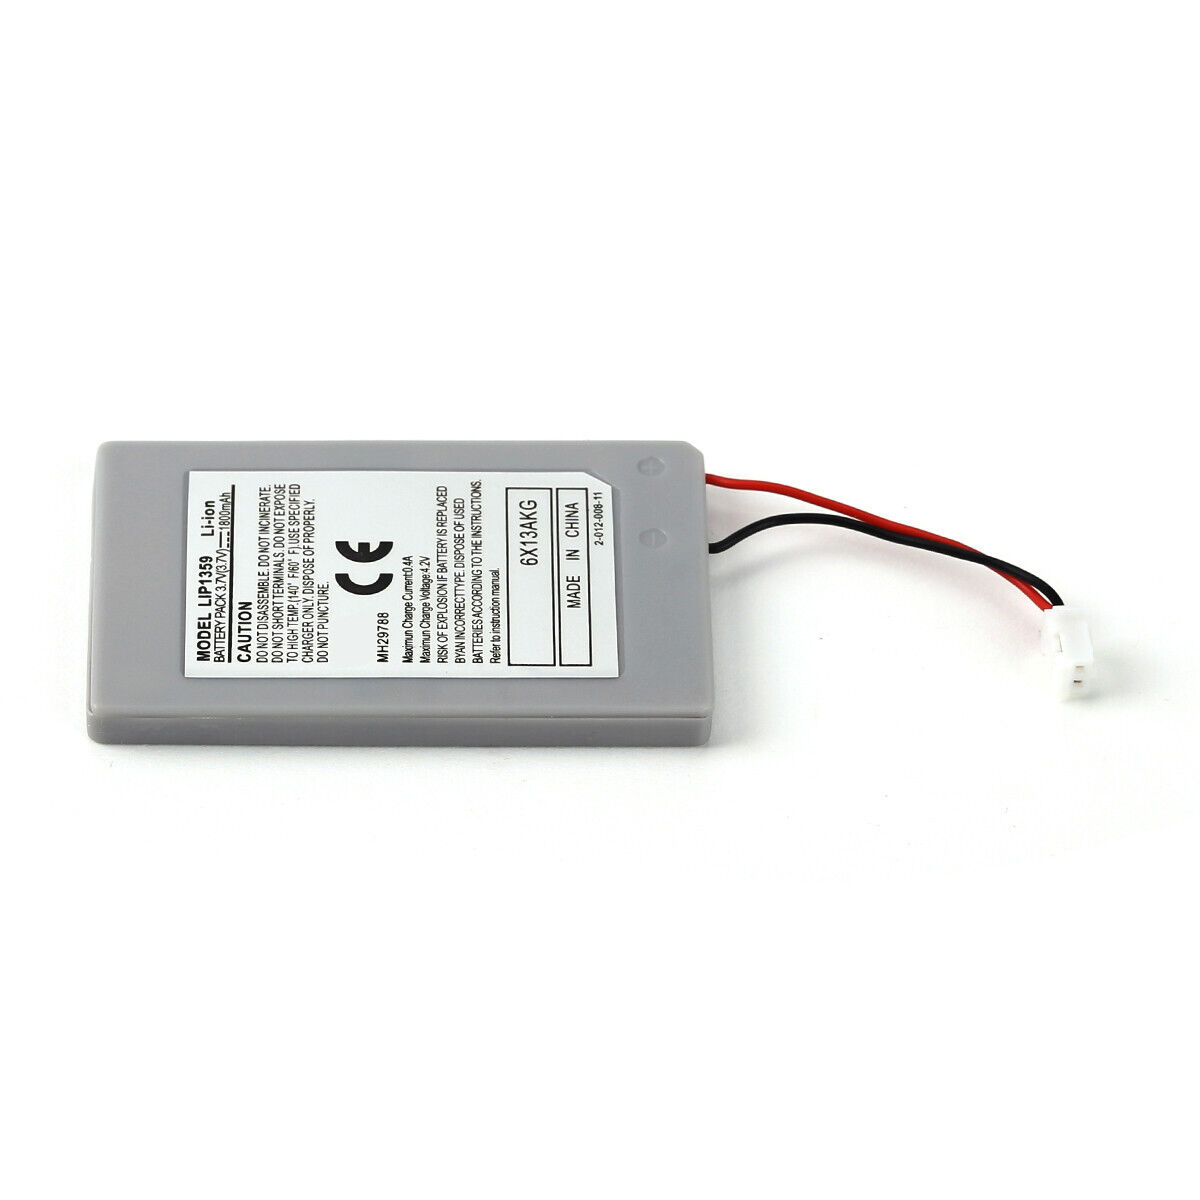 New 1800mAh Rechargeable Battery For Sony Playstation 3 PS3 Wireless Controller Unbranded - фотография #13